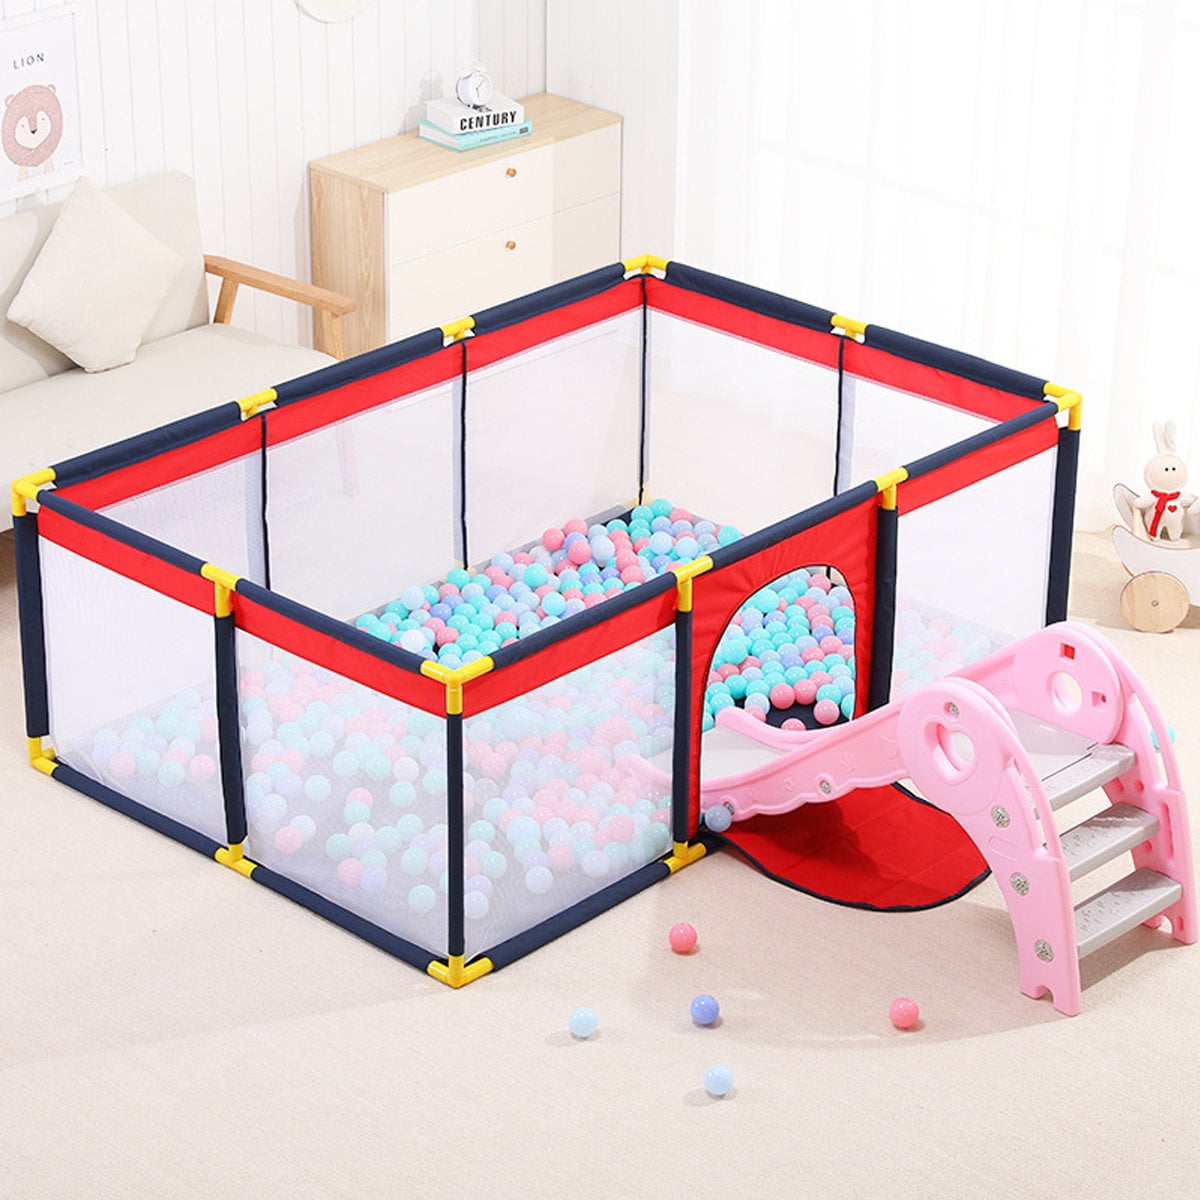 Playgro is Encouraging Imagination with STEM/STEM for a bright future Playgro 0186366 Pop And Drop Activity Ball Gym for baby infant toddler children Great start for a world of learning 